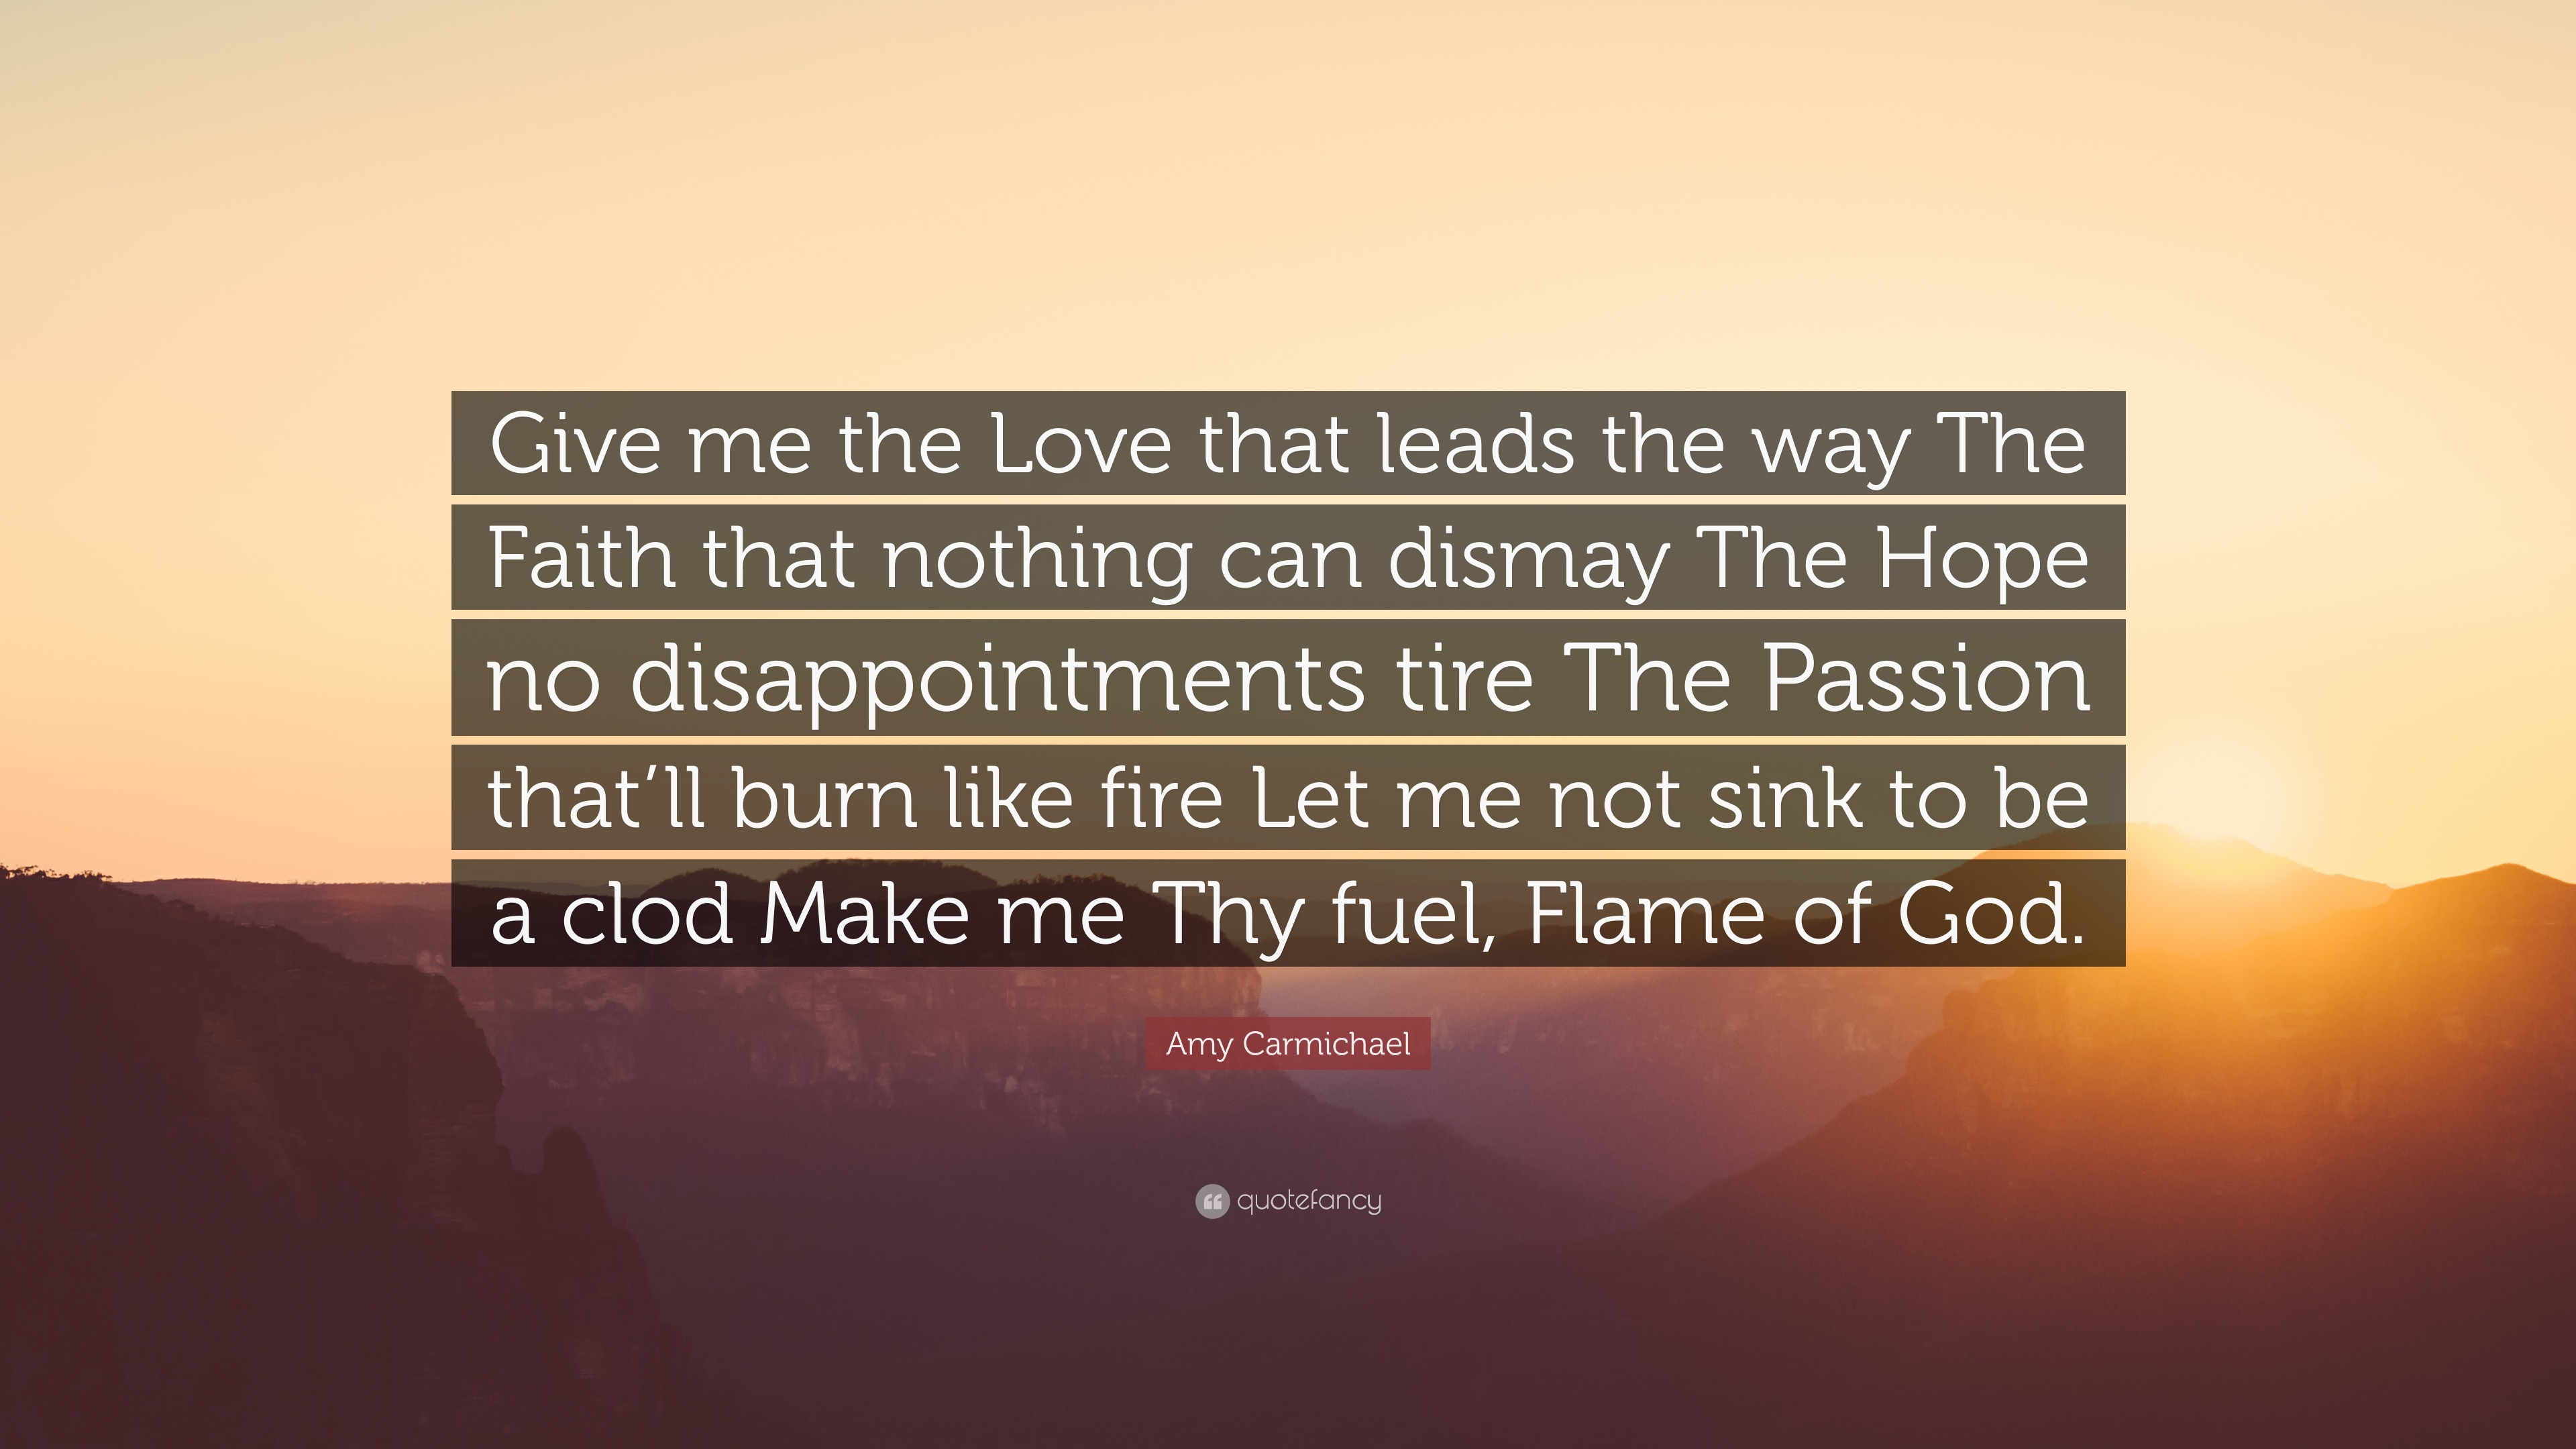 Amy Carmichael Quote “Give me the Love that leads the way The Faith that